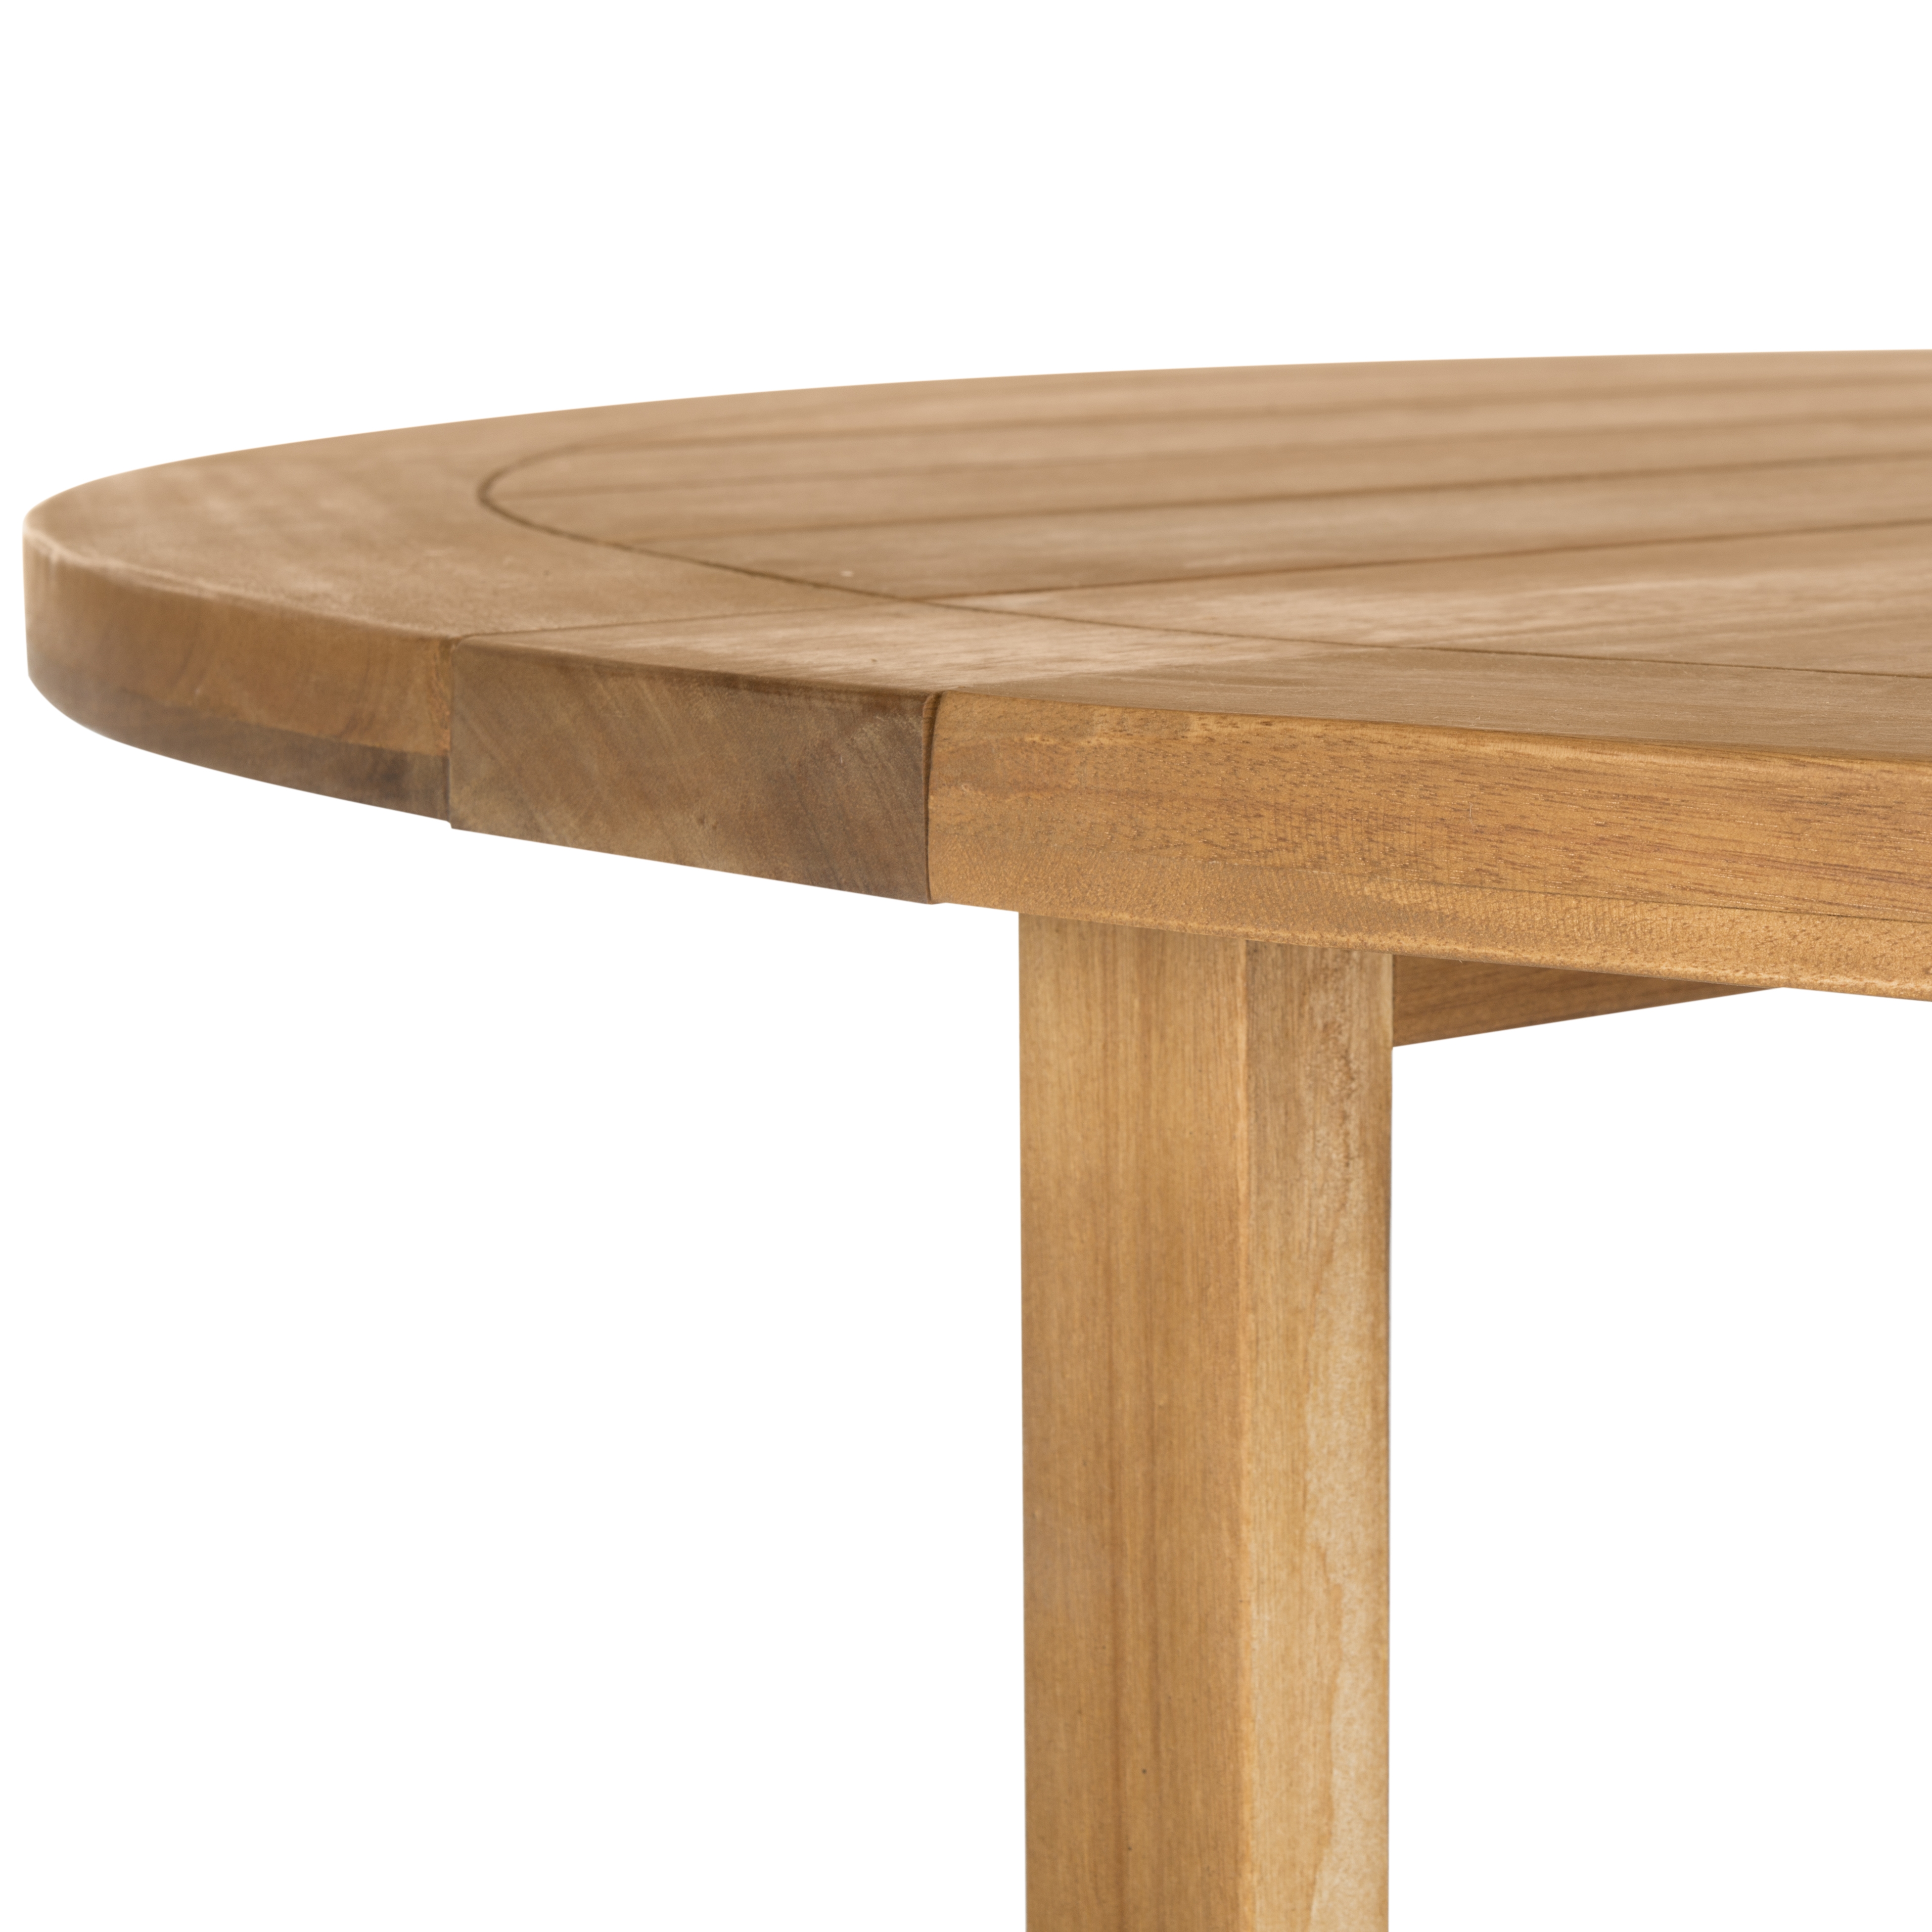 Wales Round 47.24-Inch Dia Dining Table - Natural - Safavieh - Image 1